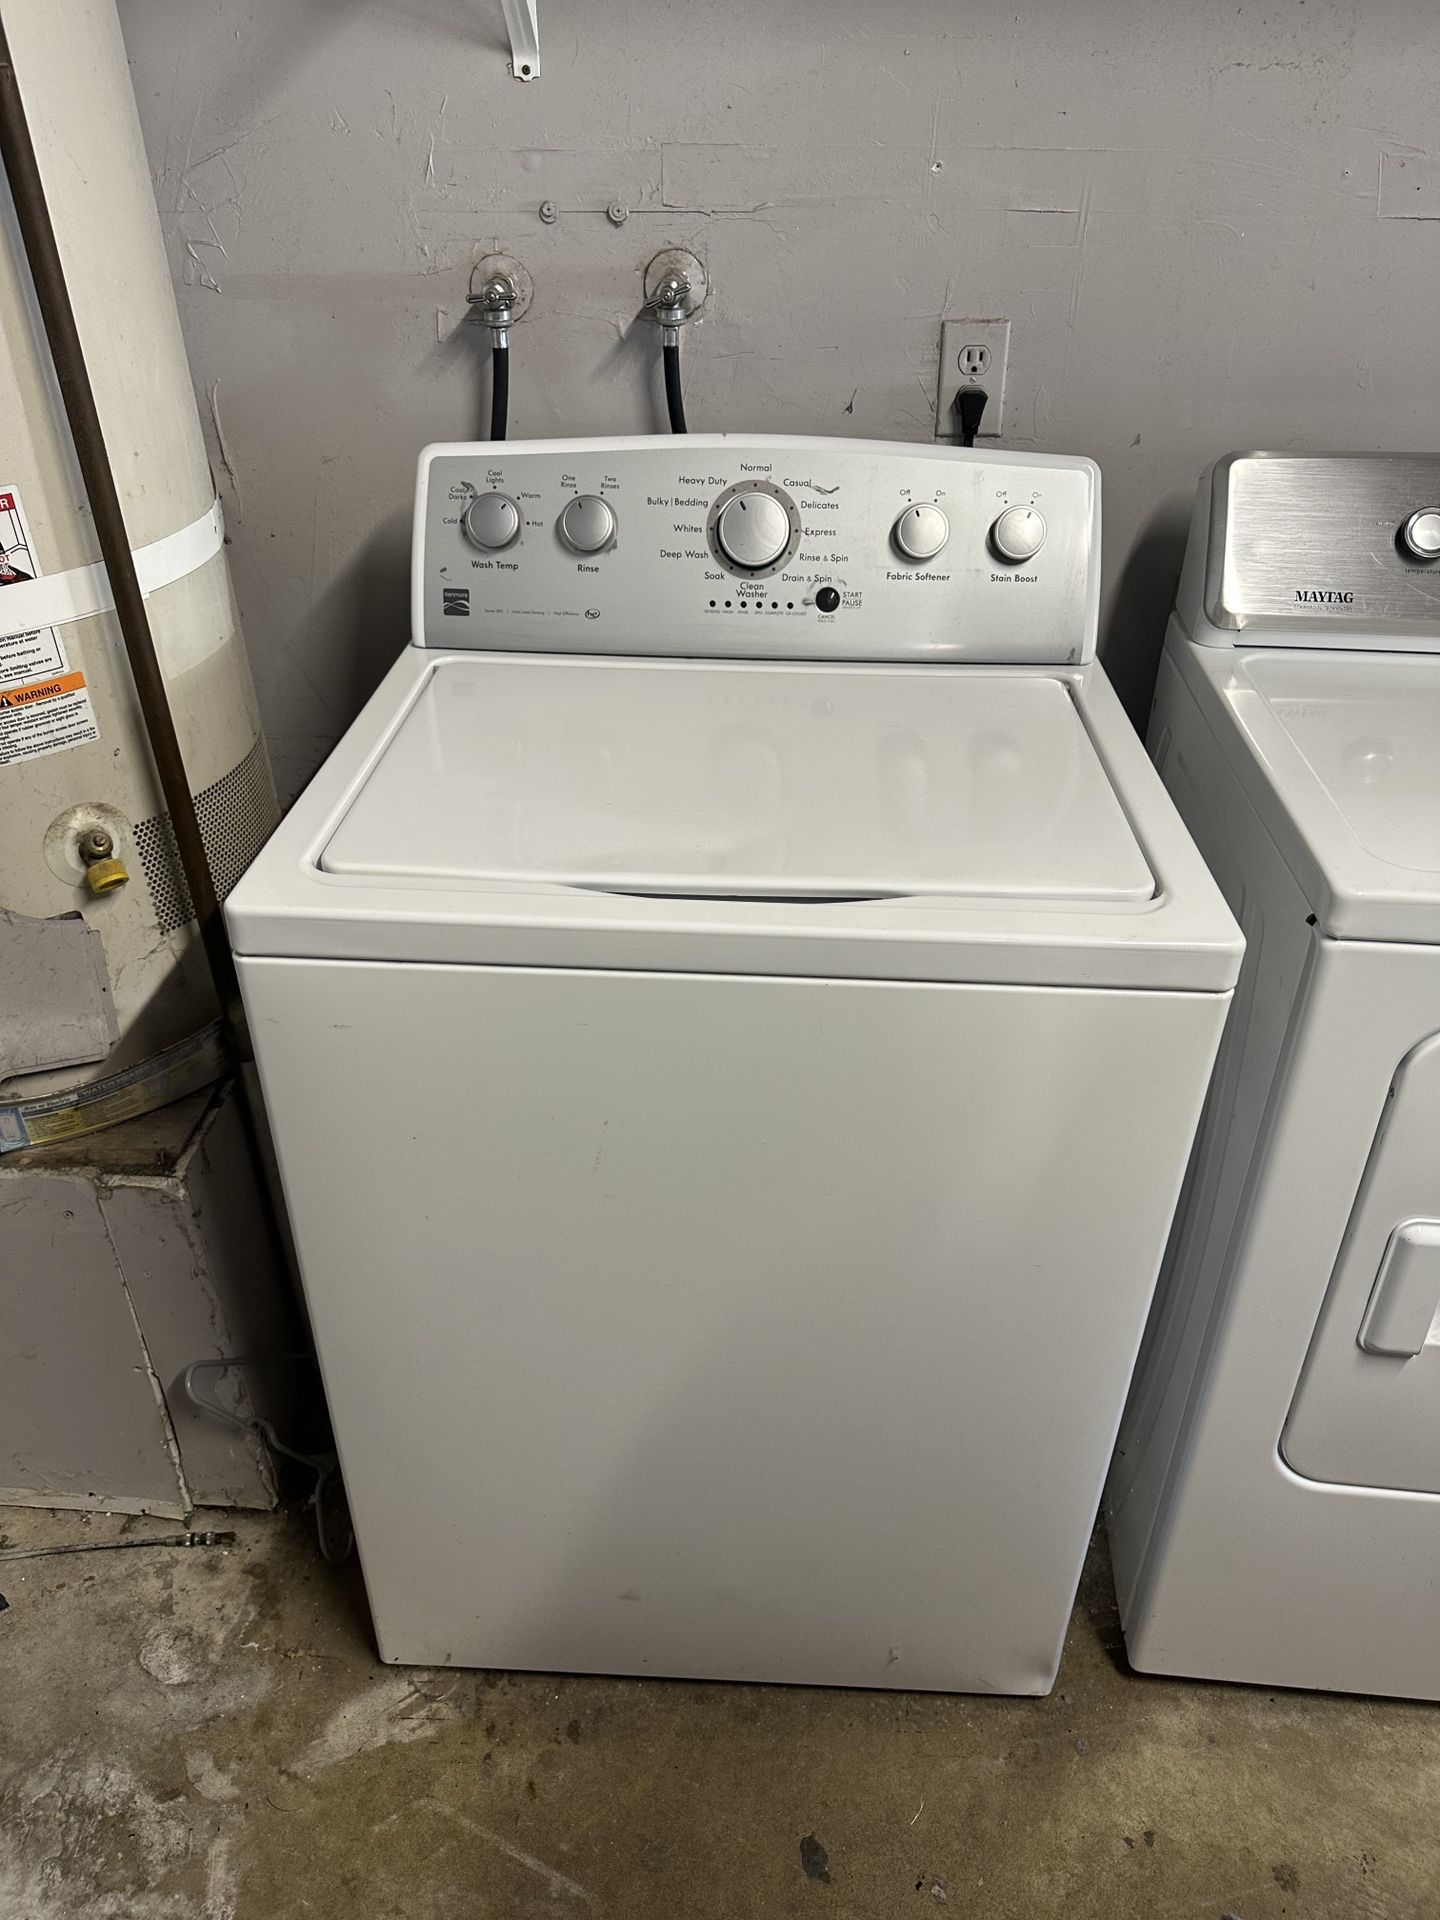 Kenmore Washer Electric 